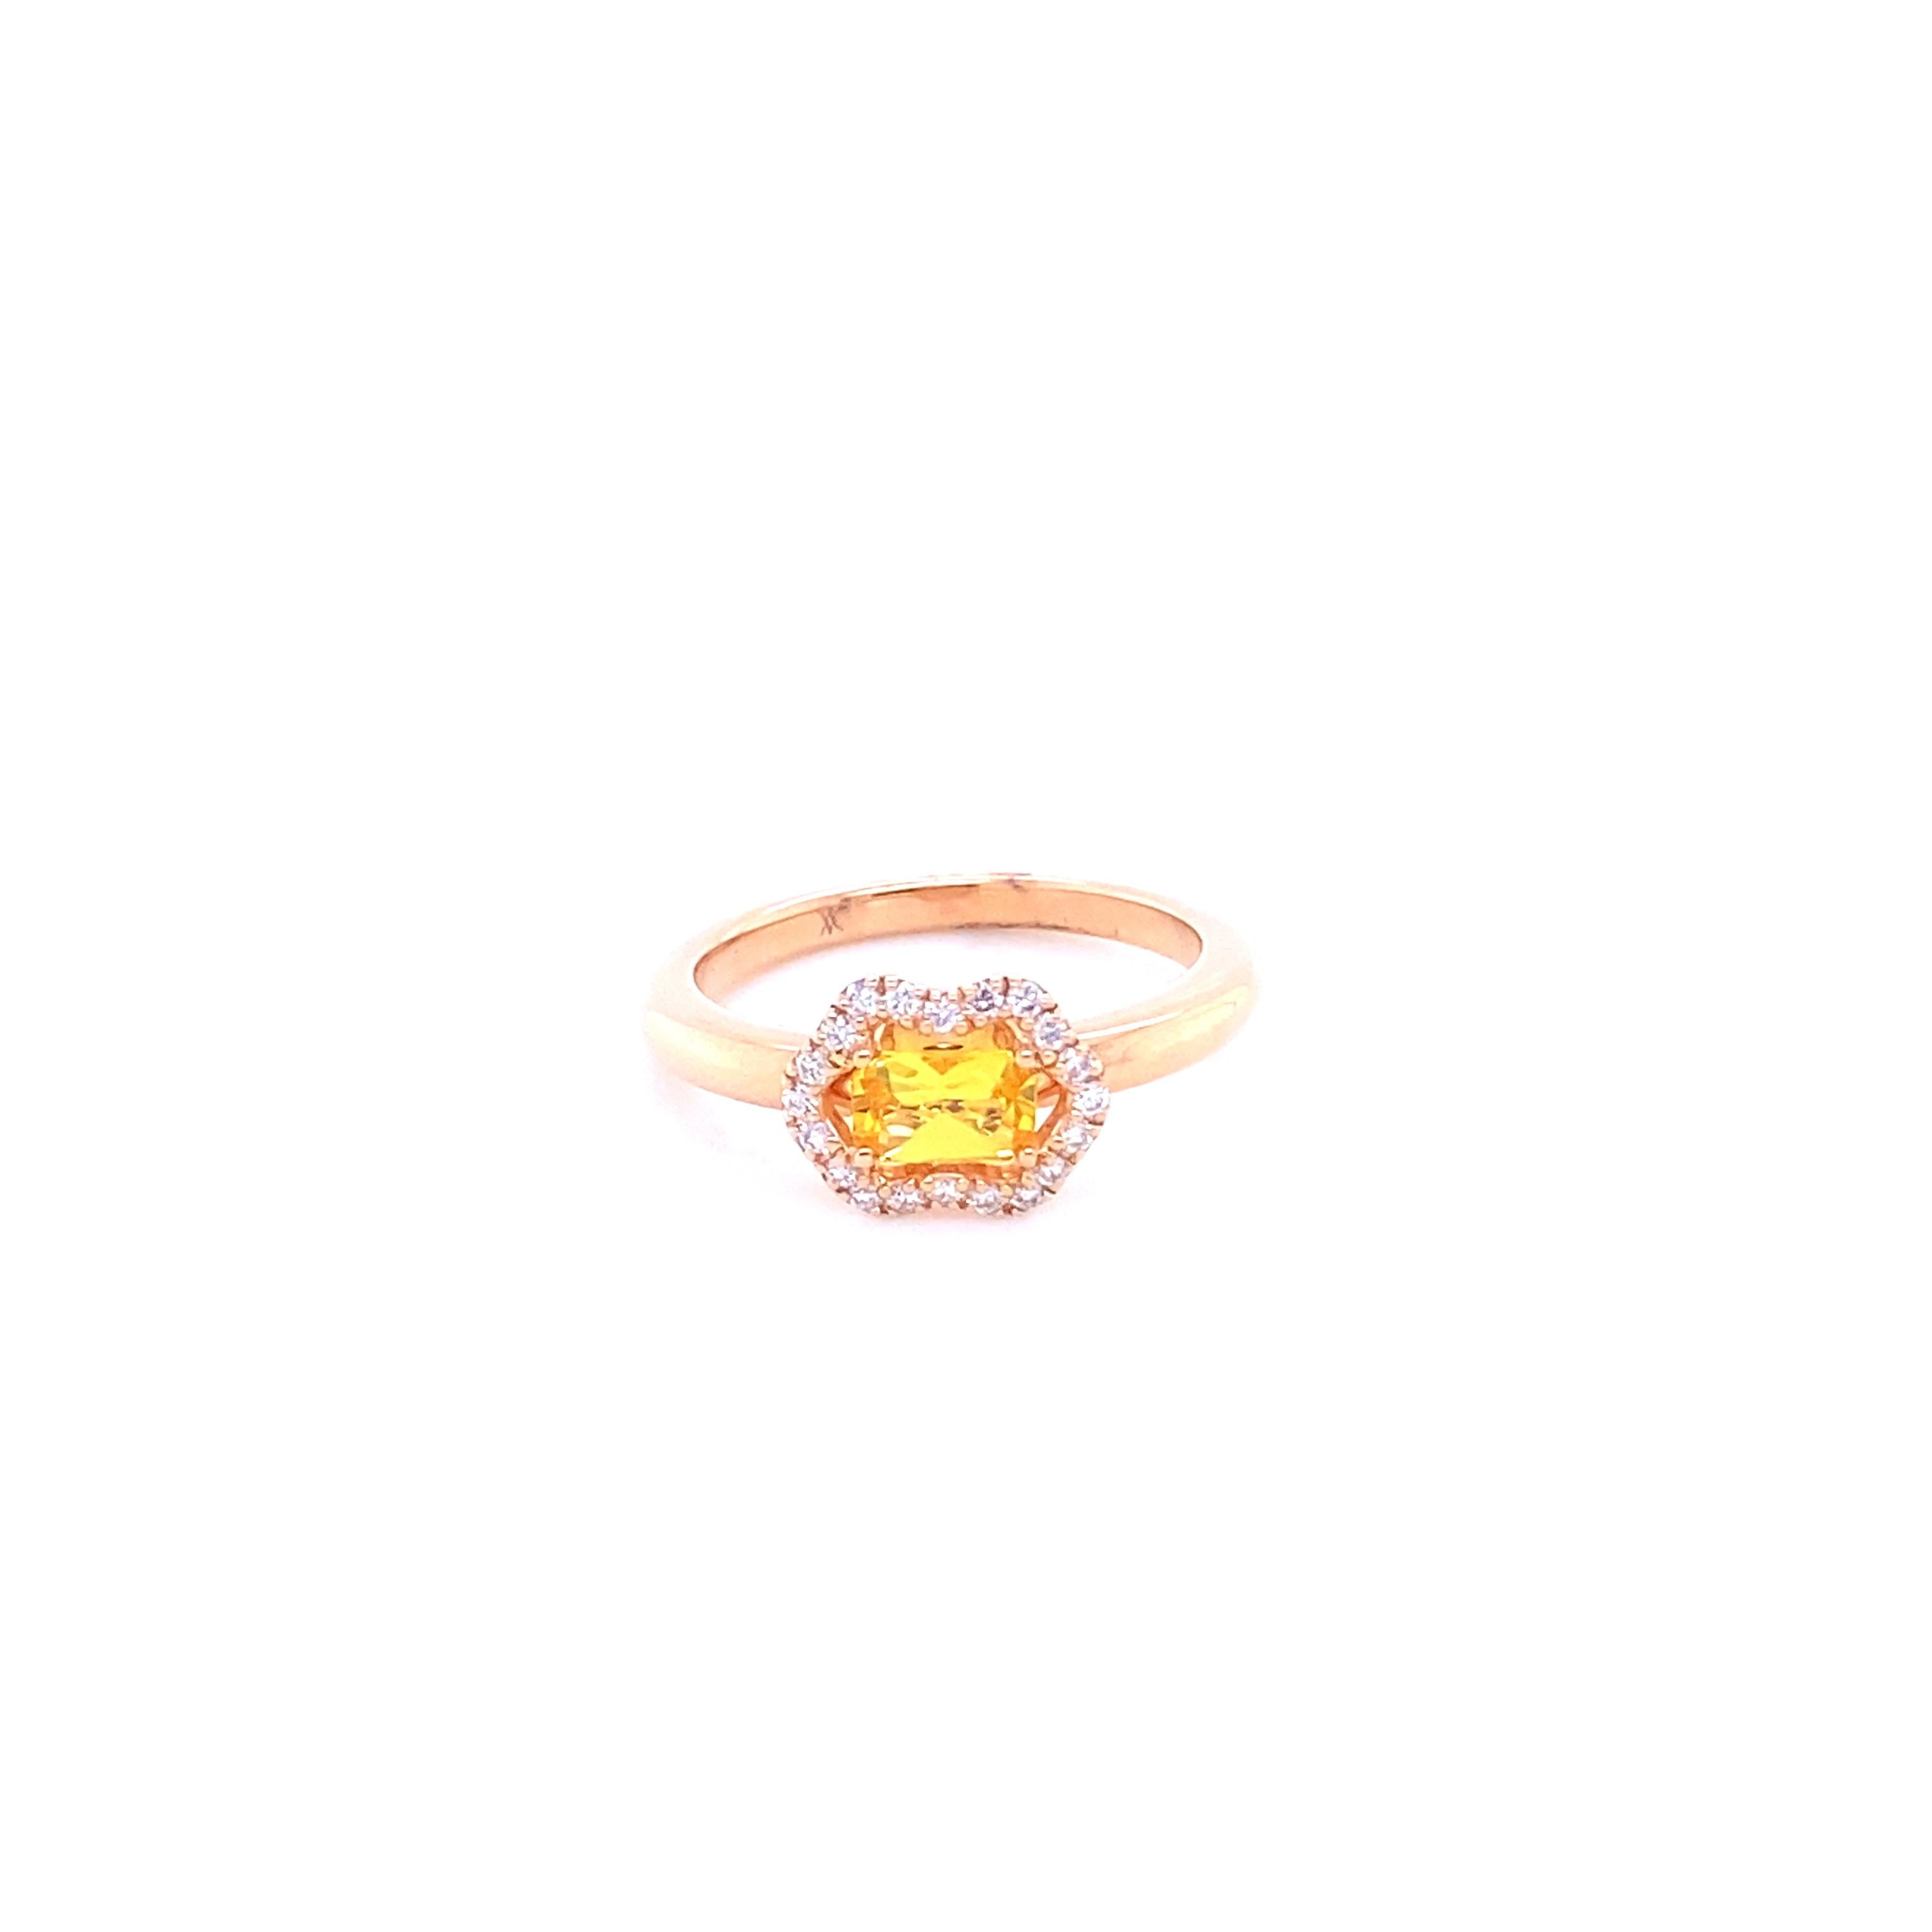 Rose Gold 18 carats Engagement Ring with Yellow Sapphire and Diamonds
Rose gold engagement ring topped with a radiant-cut yellow sapphire weighing 0.43 carats. Around the sapphire we have 20 diamonds of brilliant cut, 0.13 carat and color F. The